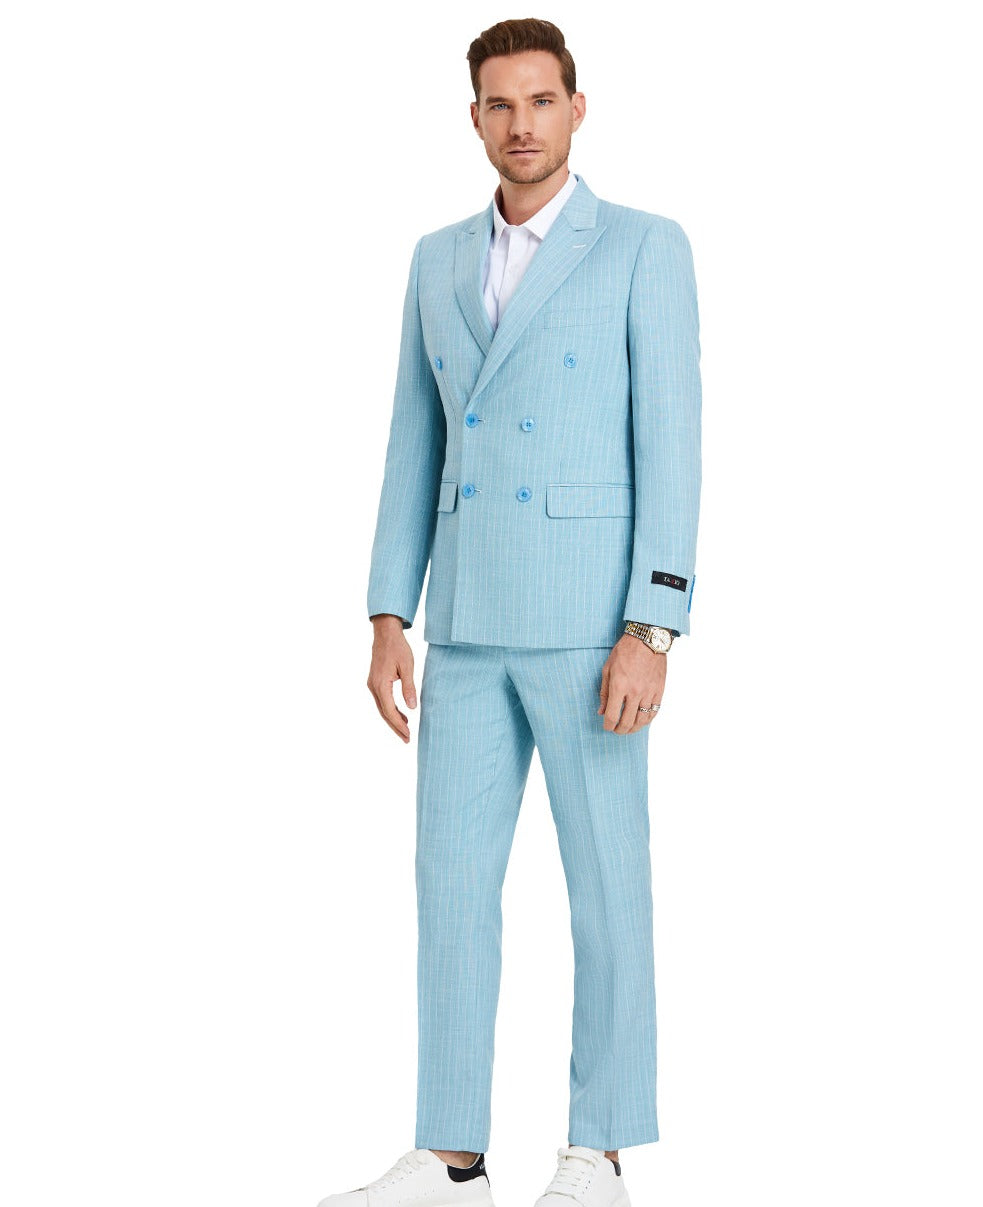 Men's Teal 2 PC Double Breasted Pin-Stripe Suit